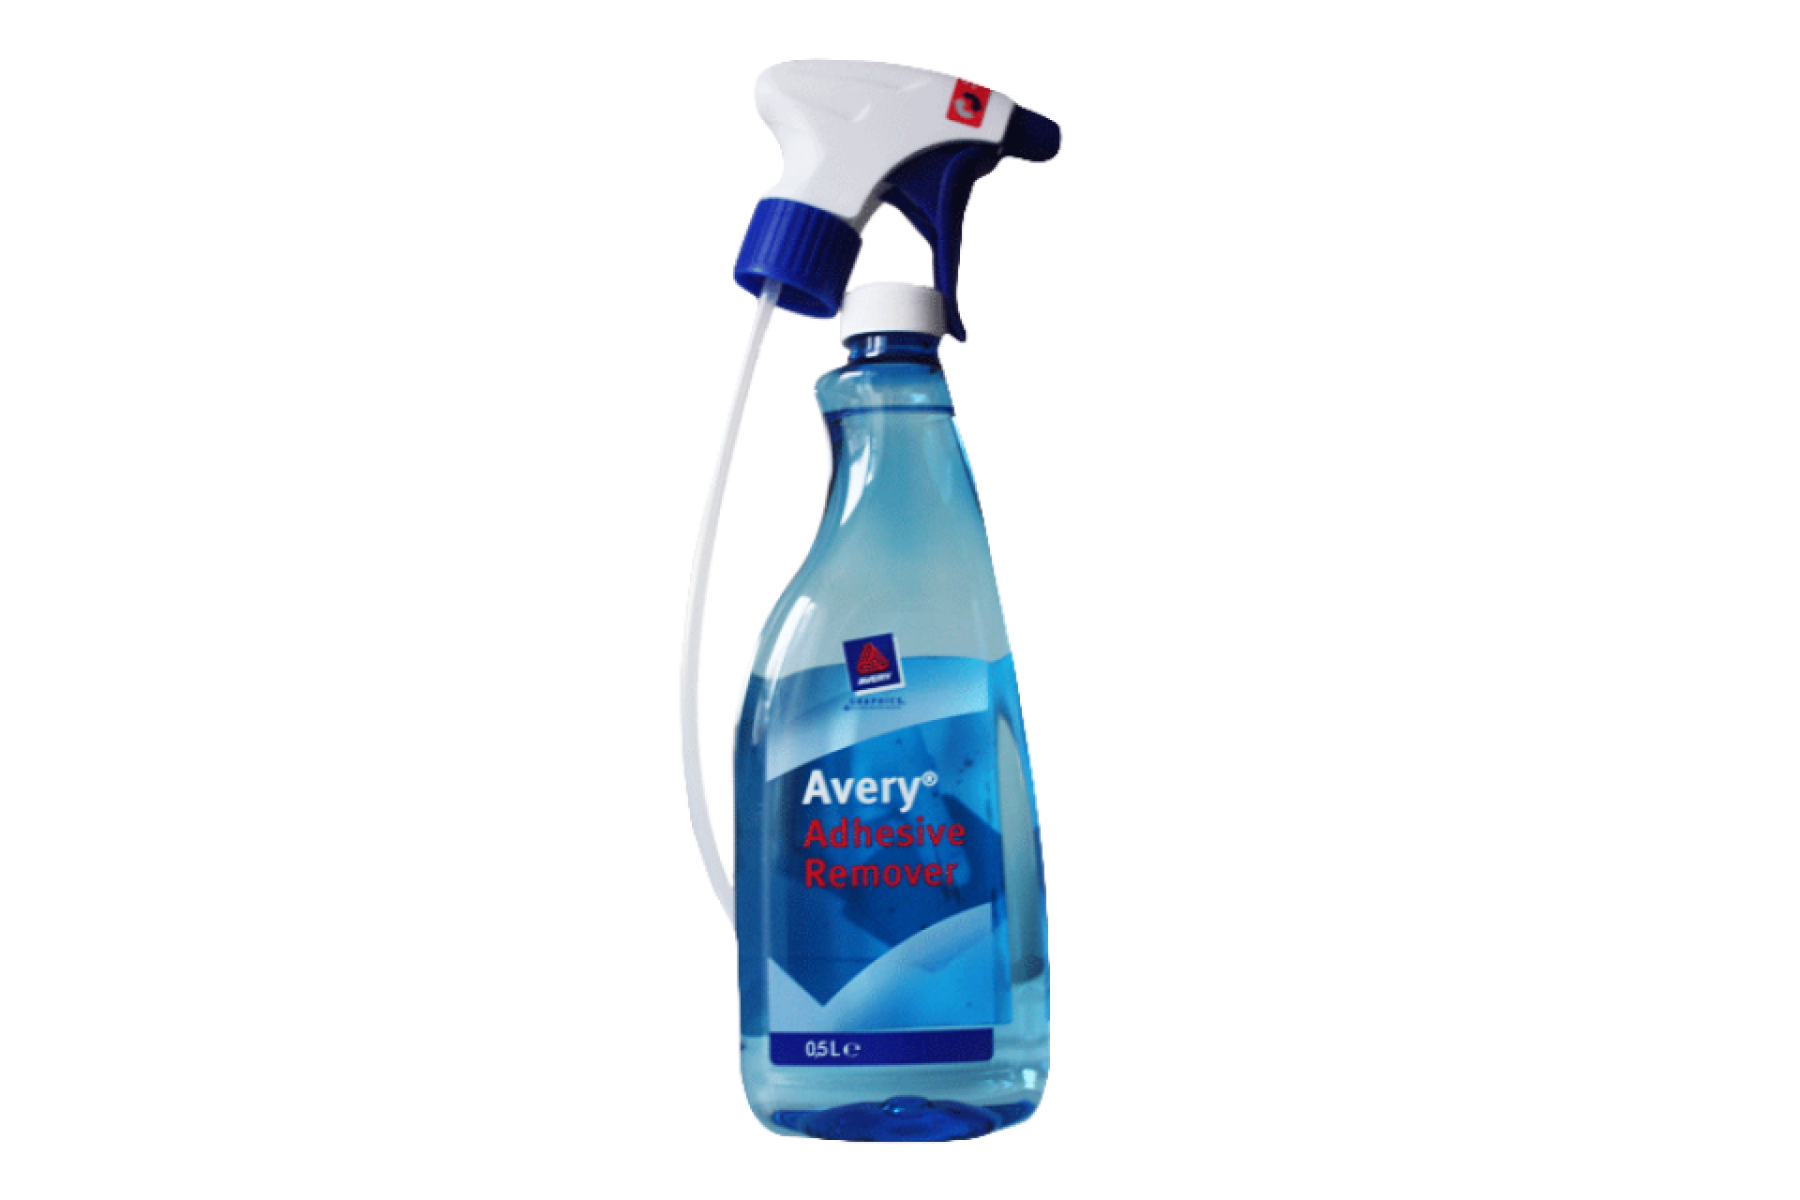 AVERY ADHESIVE REMOVER 0.5L